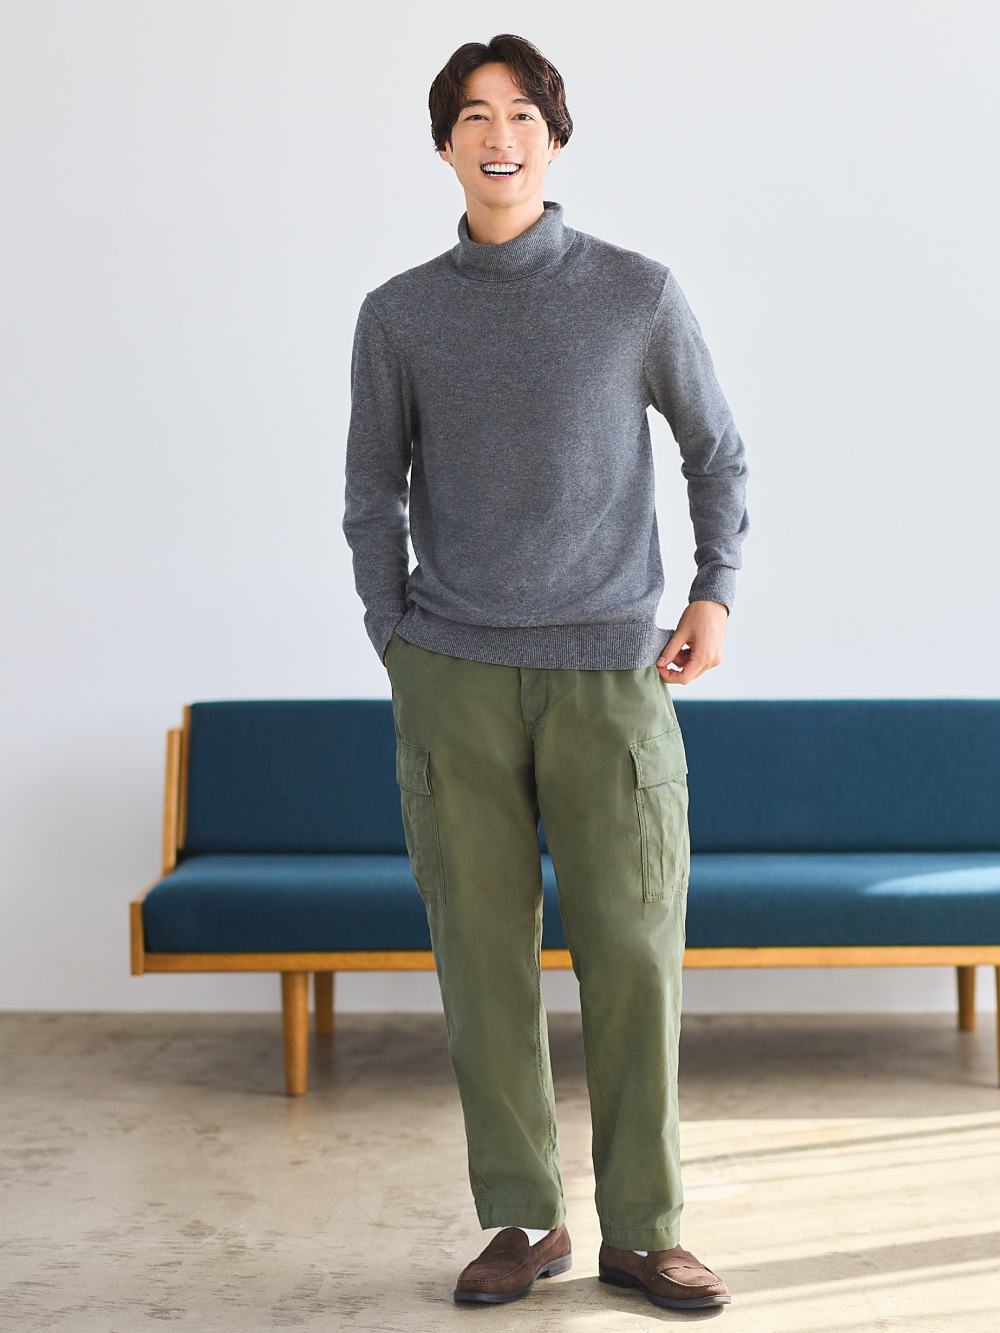 Shop looks for「CARGO PANTS」